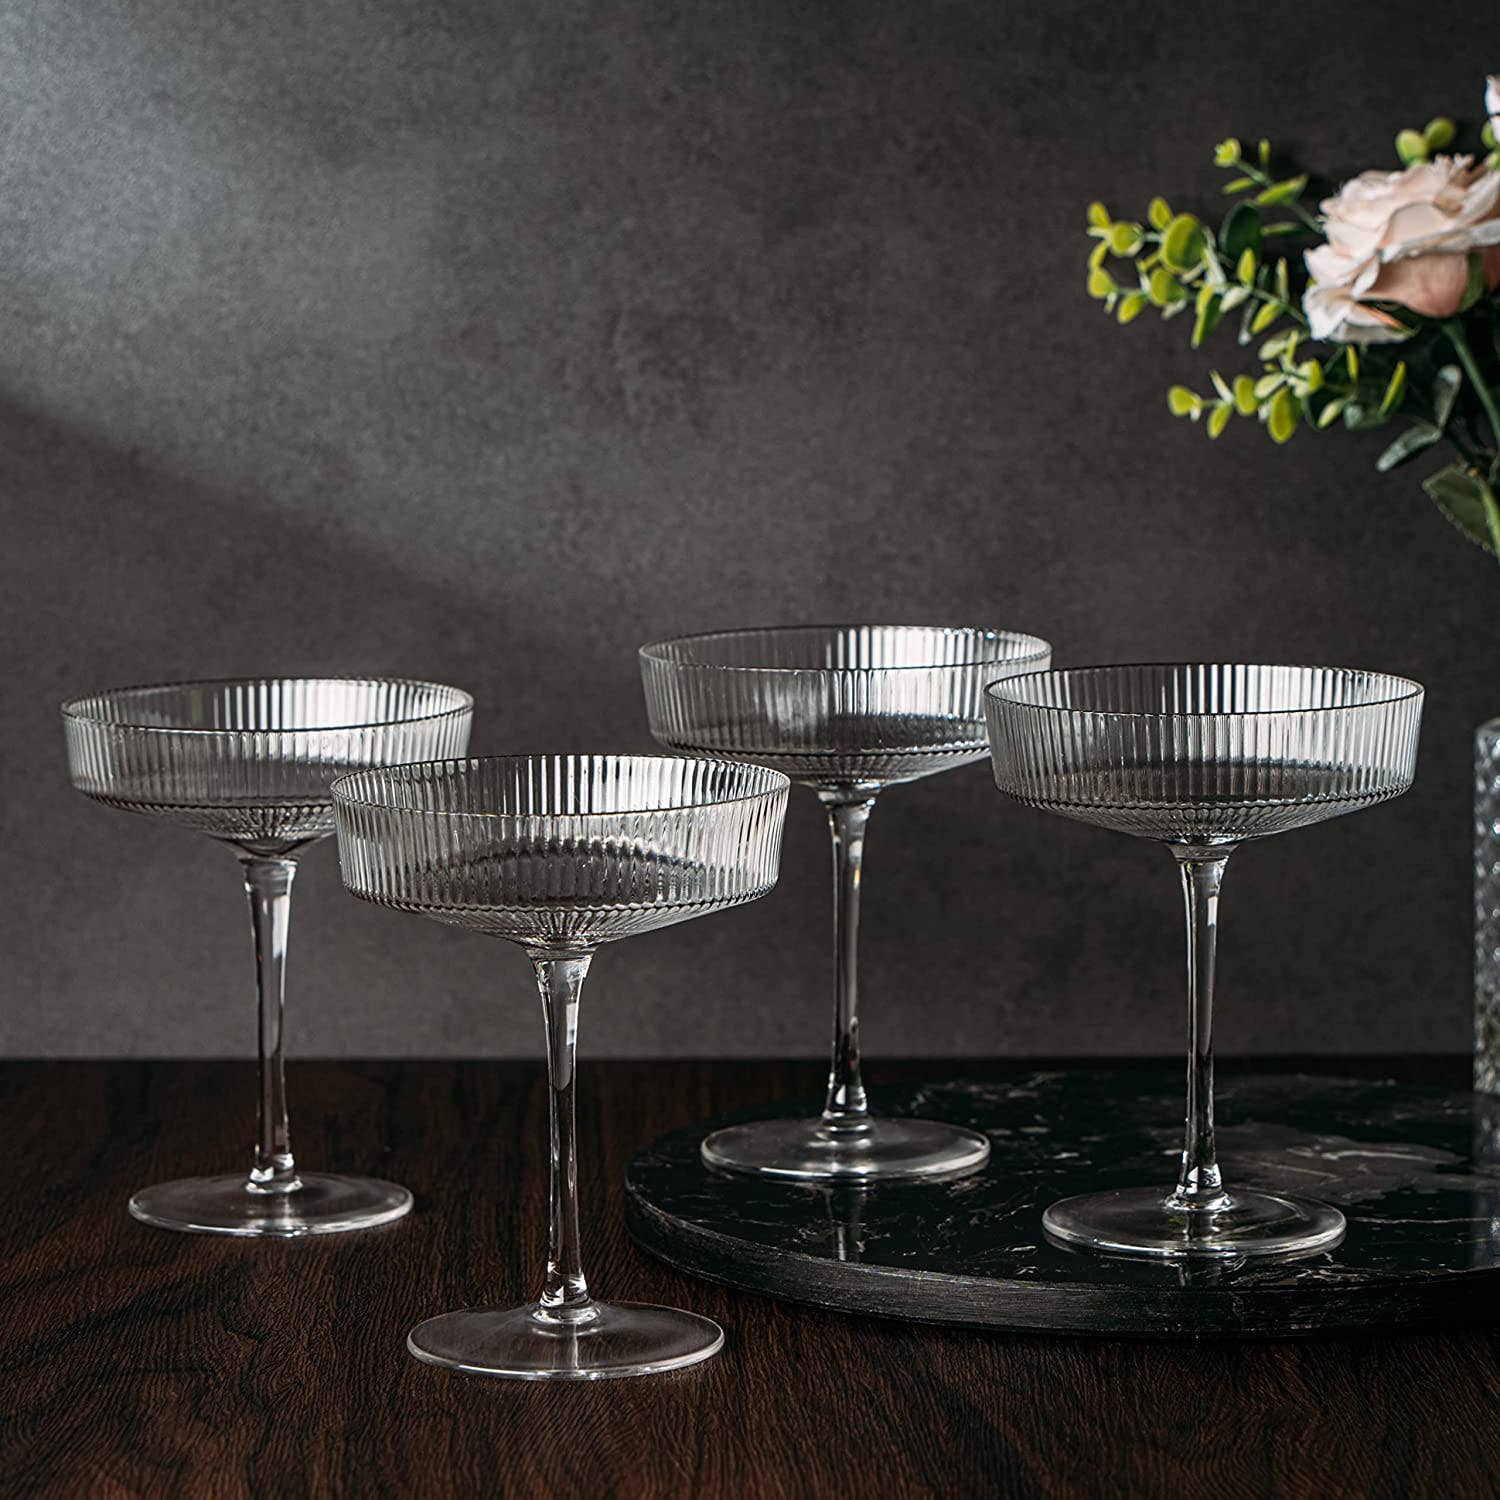 Ribbed Art Deco Crystal Coupe Cocktail Glasses | Set of 4